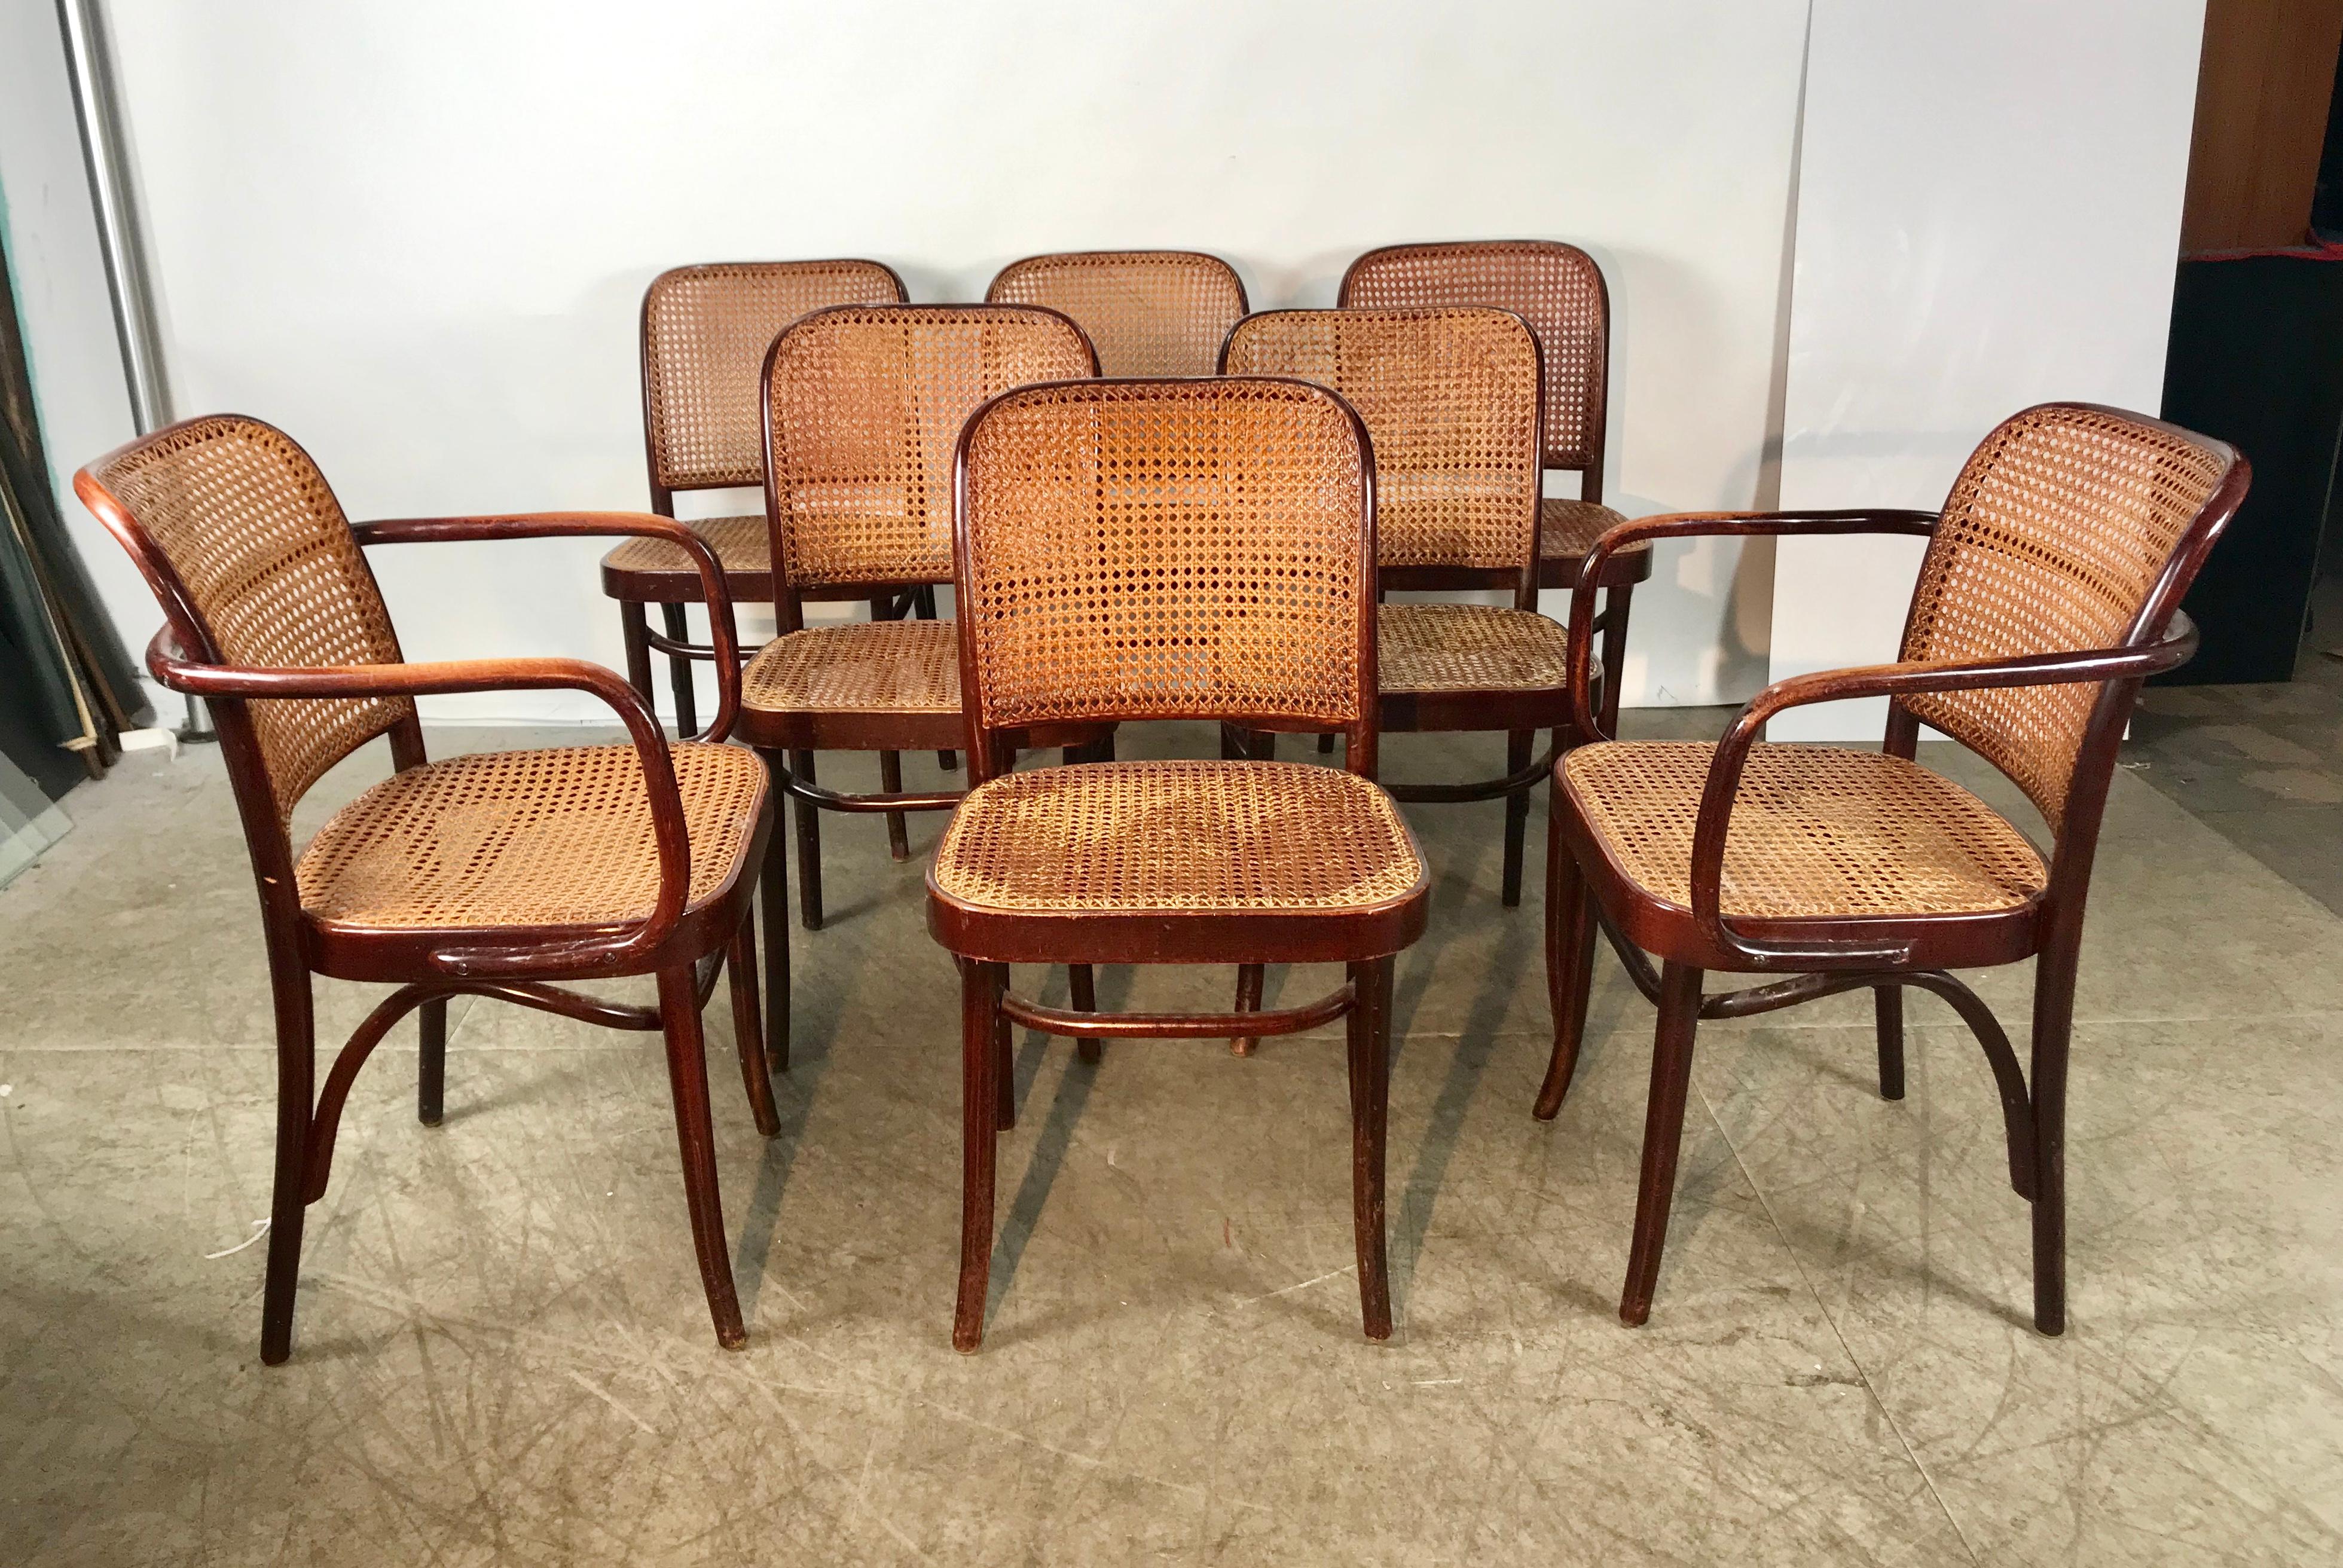 Late 20th Century Set of 8 Bentwood and Cane Josef Hoffmann Prague Chairs FMG Poland, Thonet